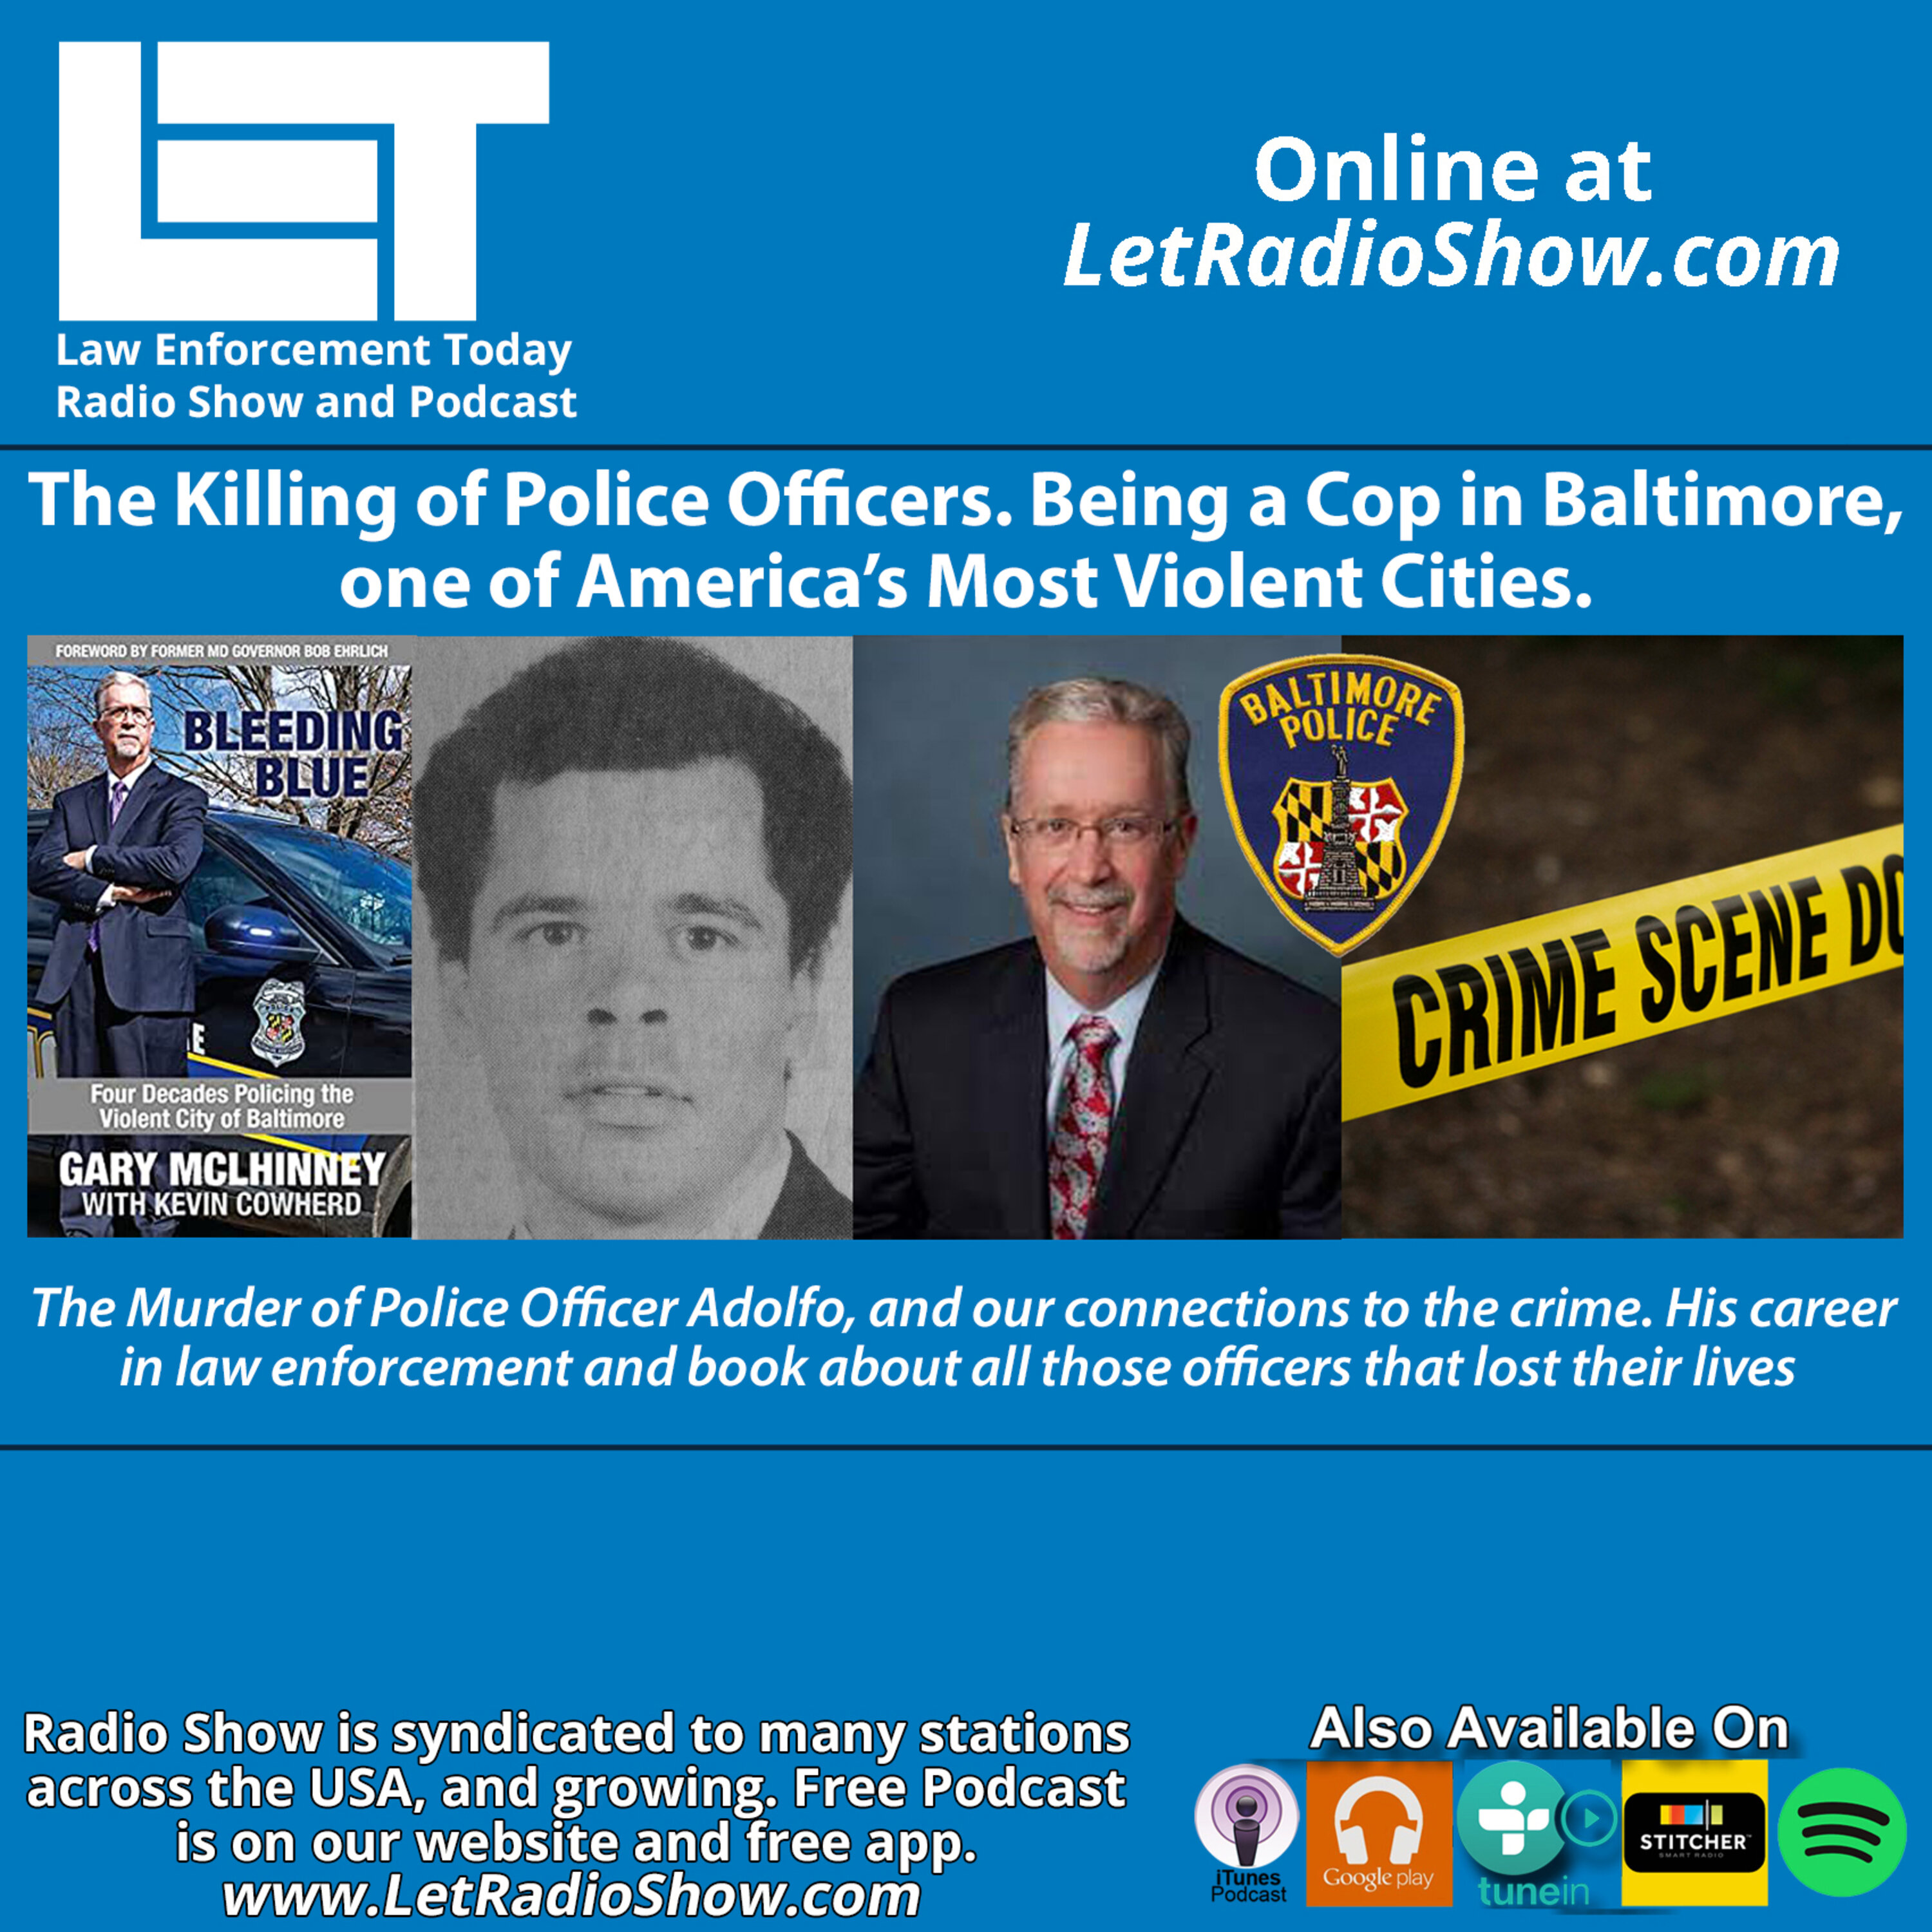 S6E73: The Killing of Police Officers. Being a Cop in Baltimore, one of America’s Most Violent Cities.